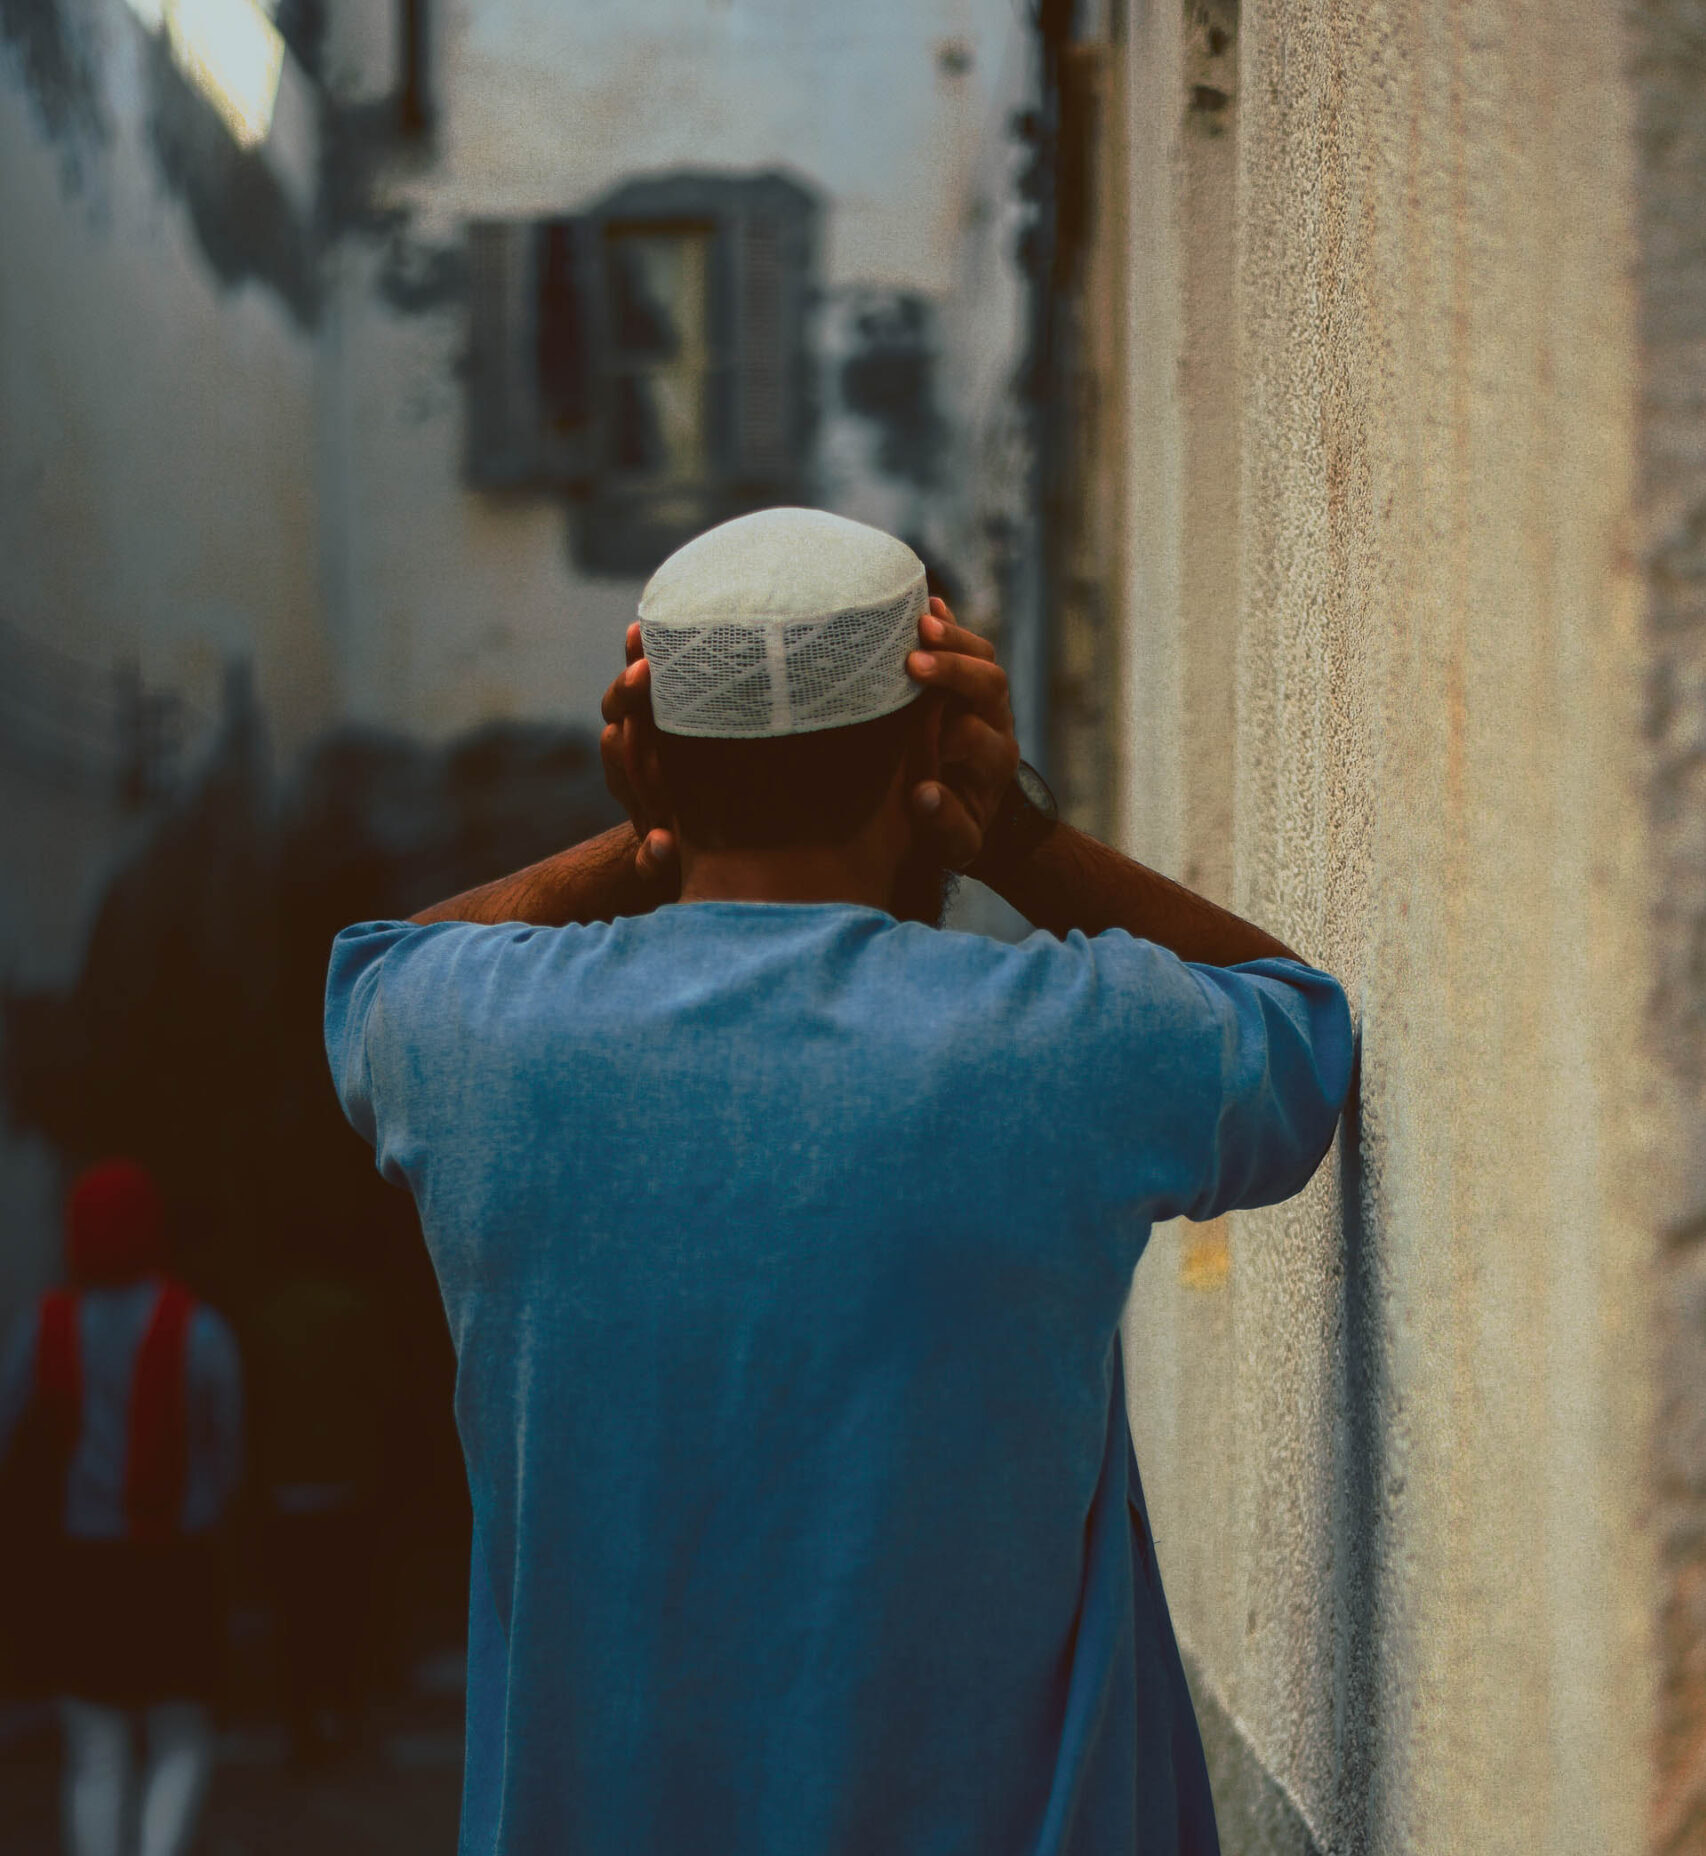 A Libyan male cover his ears wearing a white hat and blue shirt